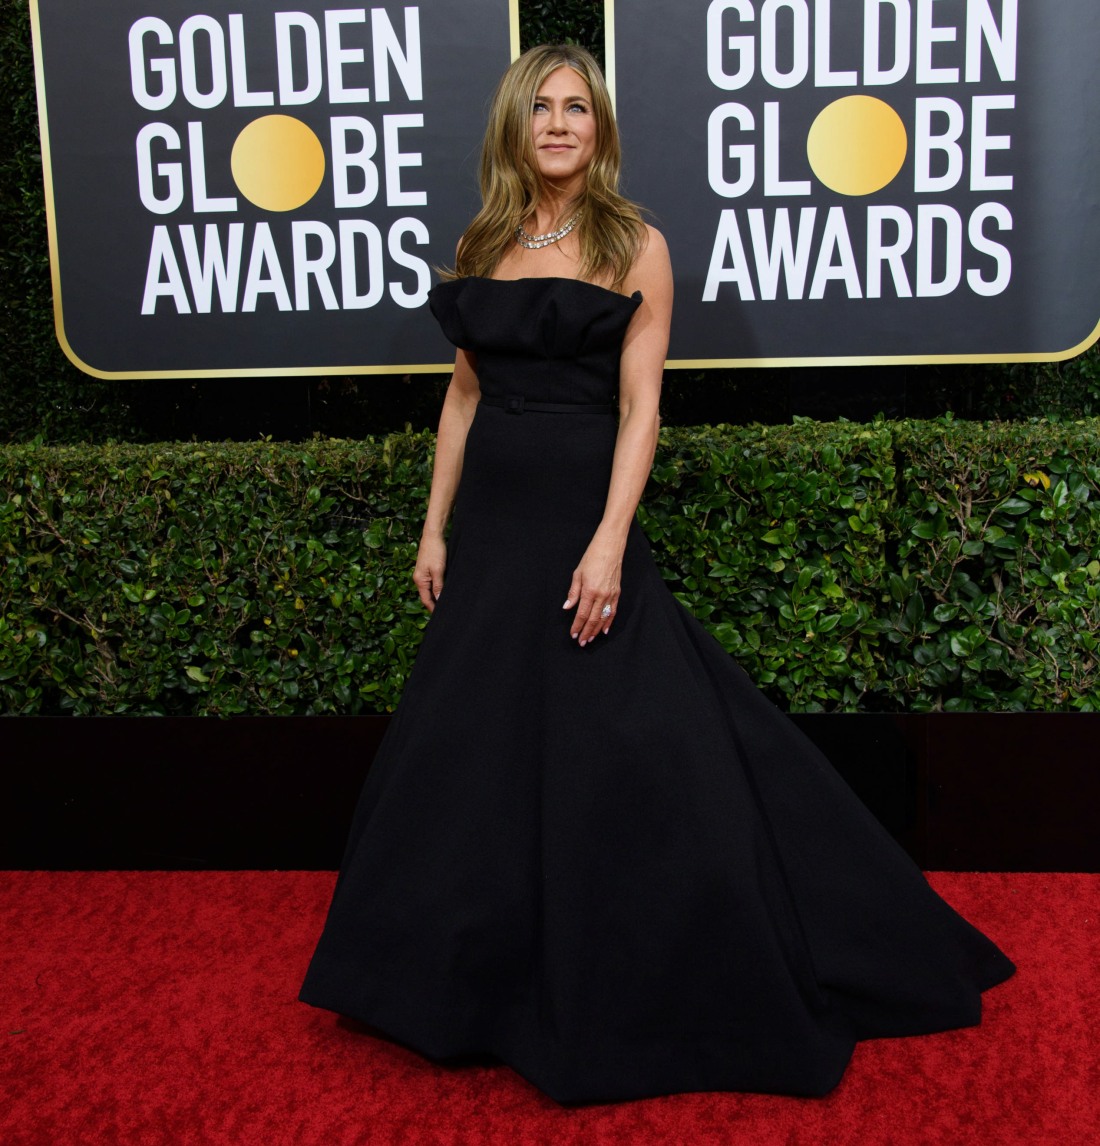 Nominee Jennifer Aniston arrives at the 77th Annual Golden Globe Awards at the Beverly Hilton in Beverly Hills, CA on Sunday, January 5, 2020.